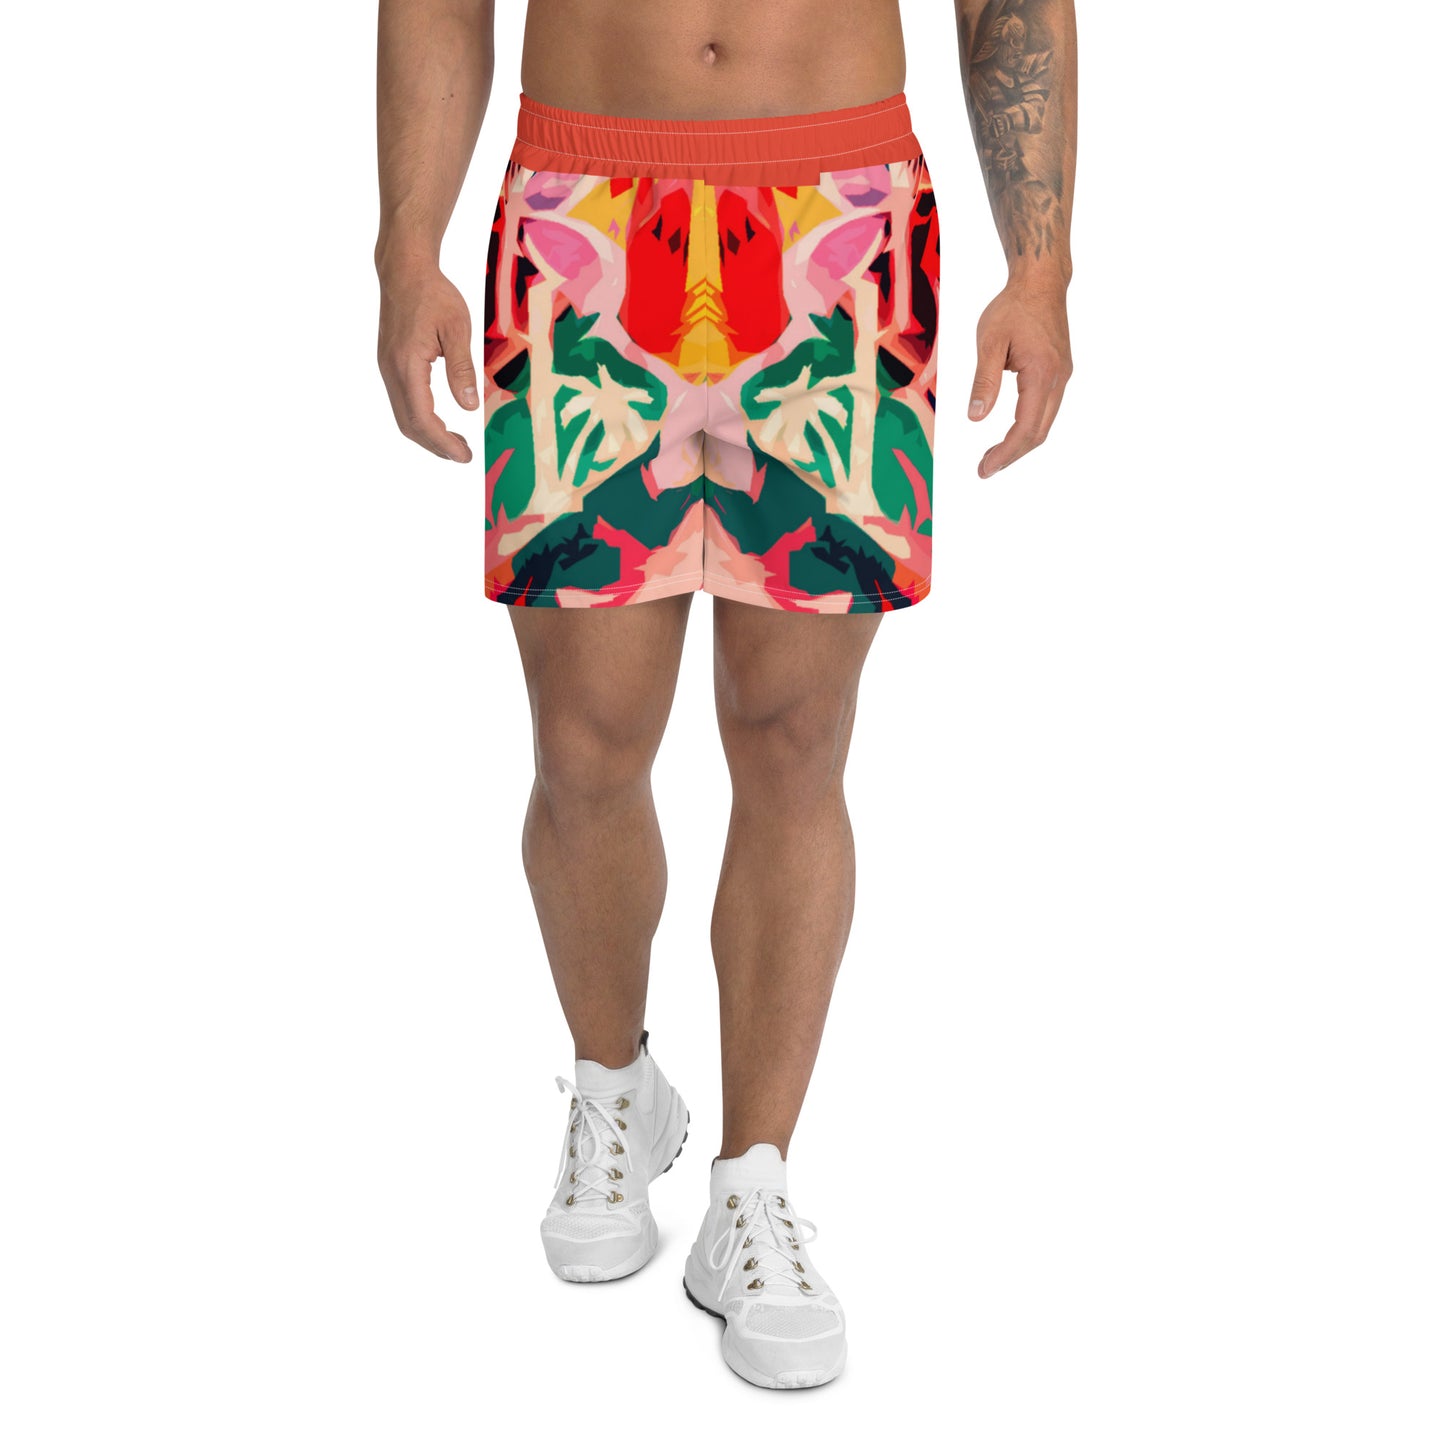 "August Tuesday" Athletic Shorts